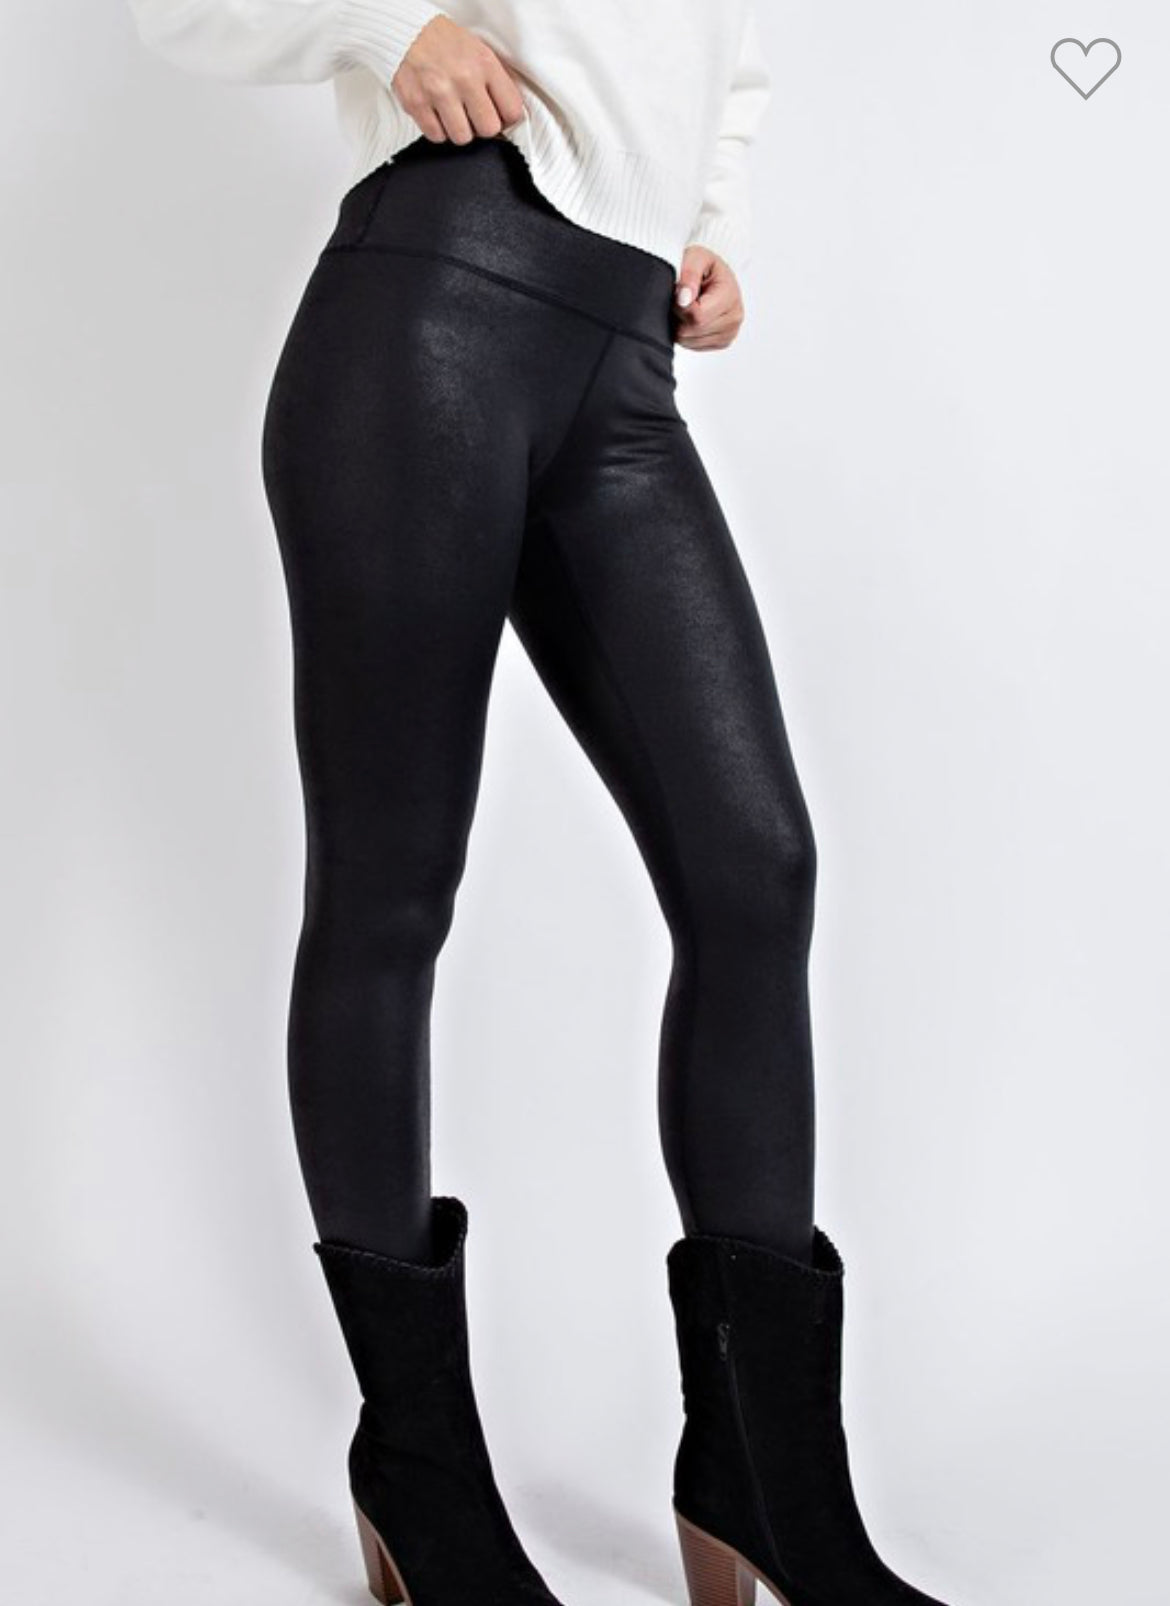 Now You Can Buy Spanx's Best-Selling Faux-Leather Leggings With a